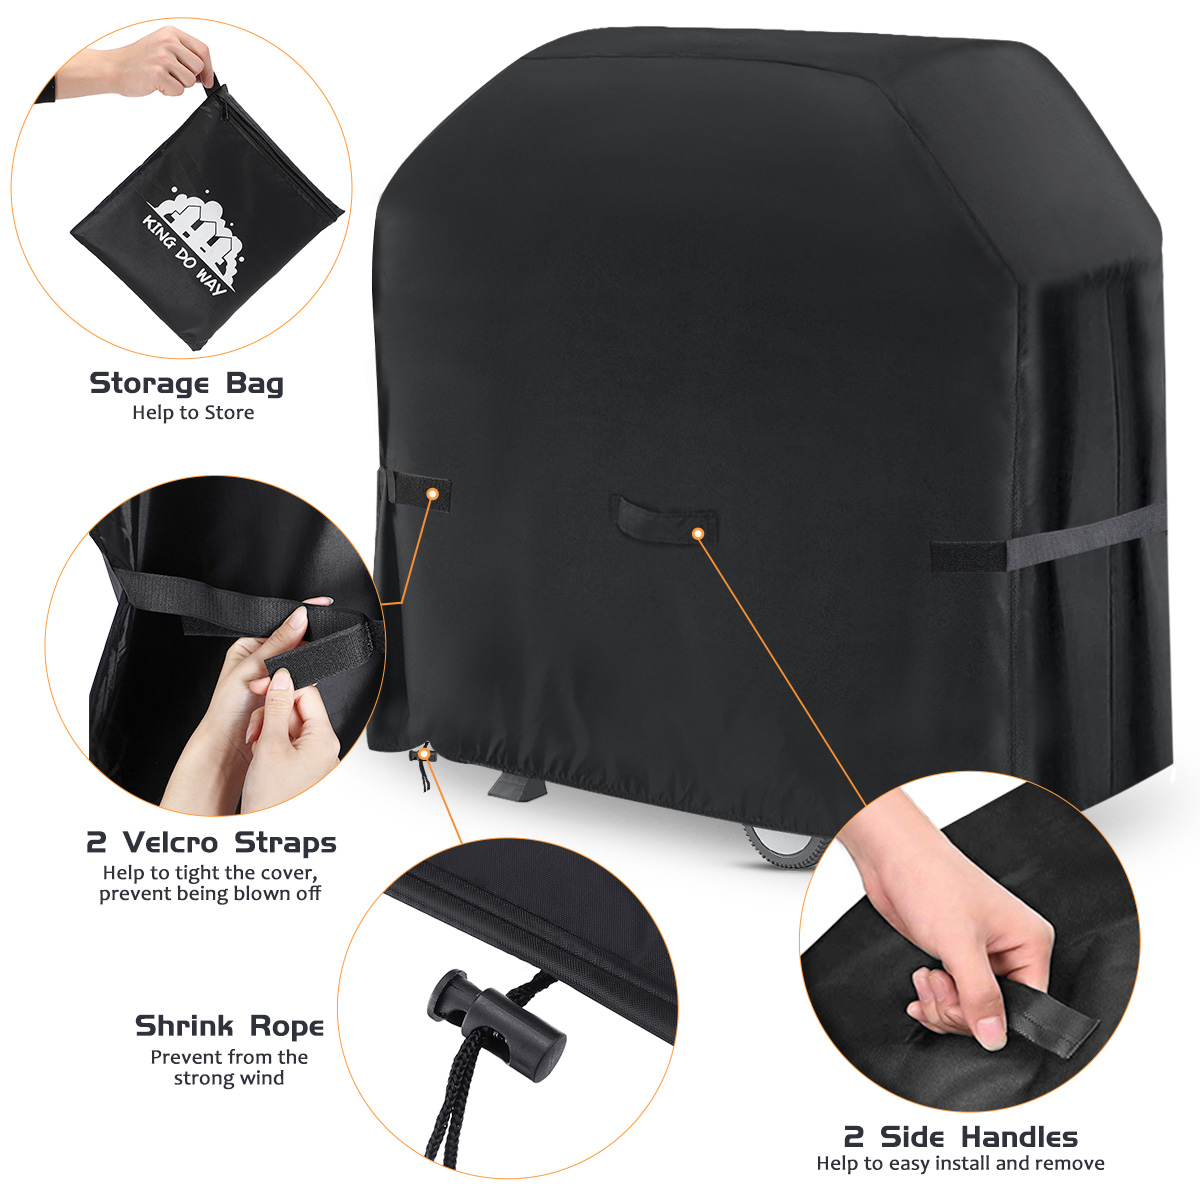 58-inch-Grill-Cover-Heavy-Duty-Waterproof-BBQ-Grill-Cover-with-Handle-Straps-Storage-Bag-and-Shrink--1707271-8